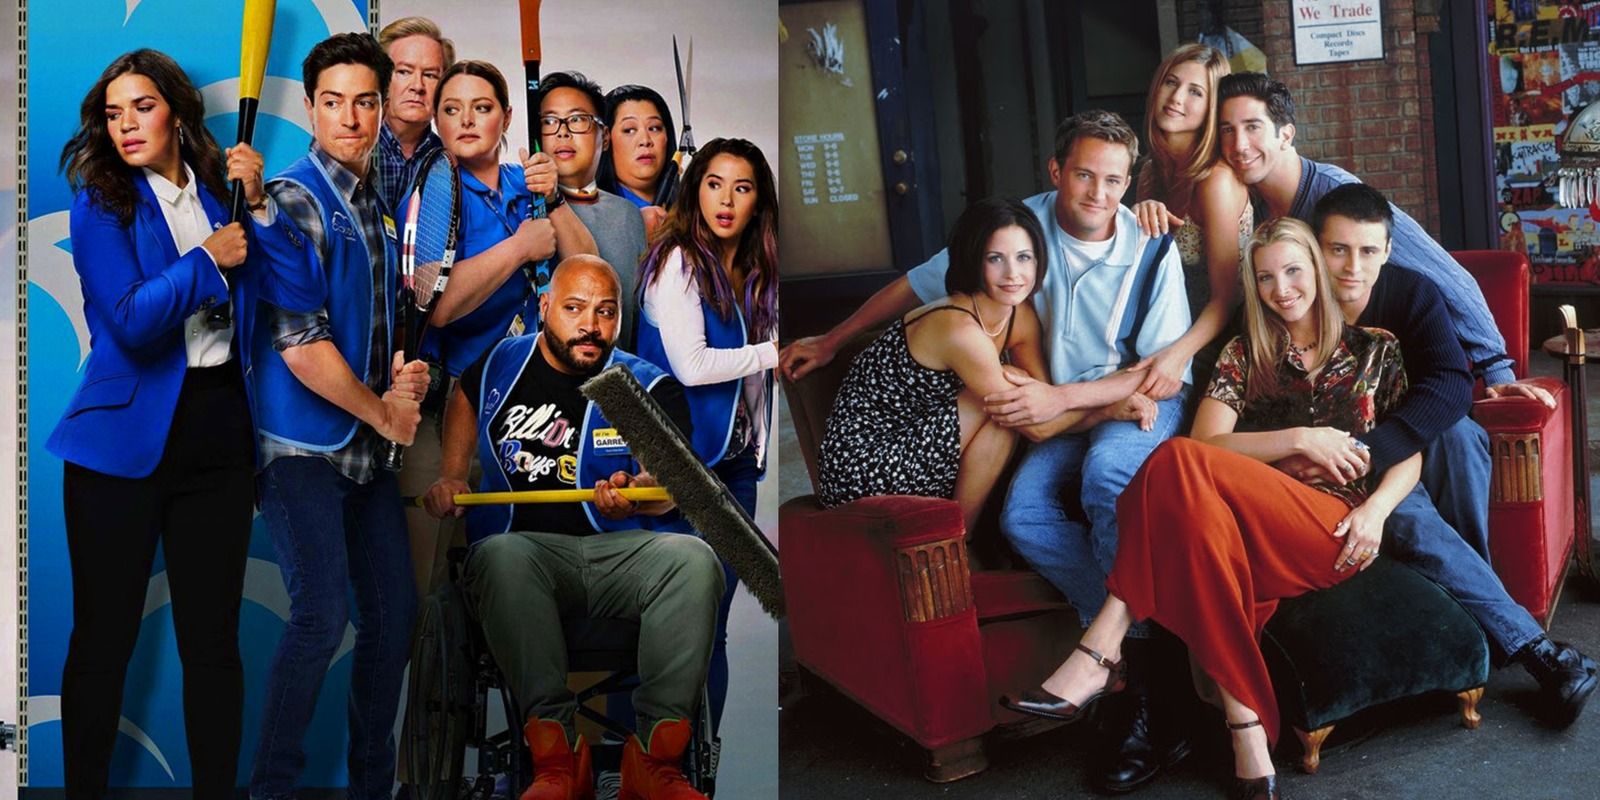 Superstore Meets Friends 5 Couples That Would Work (& 5 That Wouldnt)